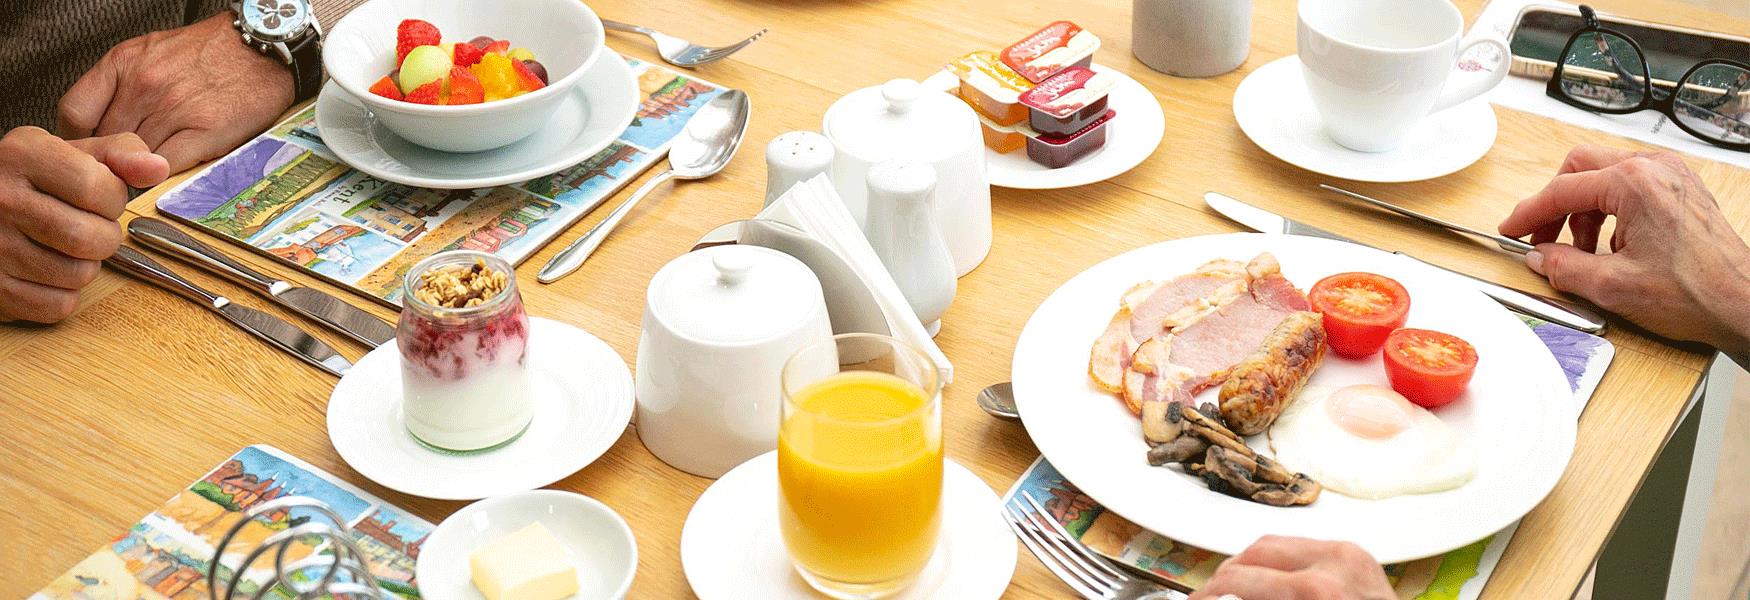 A great breakfast is on of the the great joys when staying at a B&B.